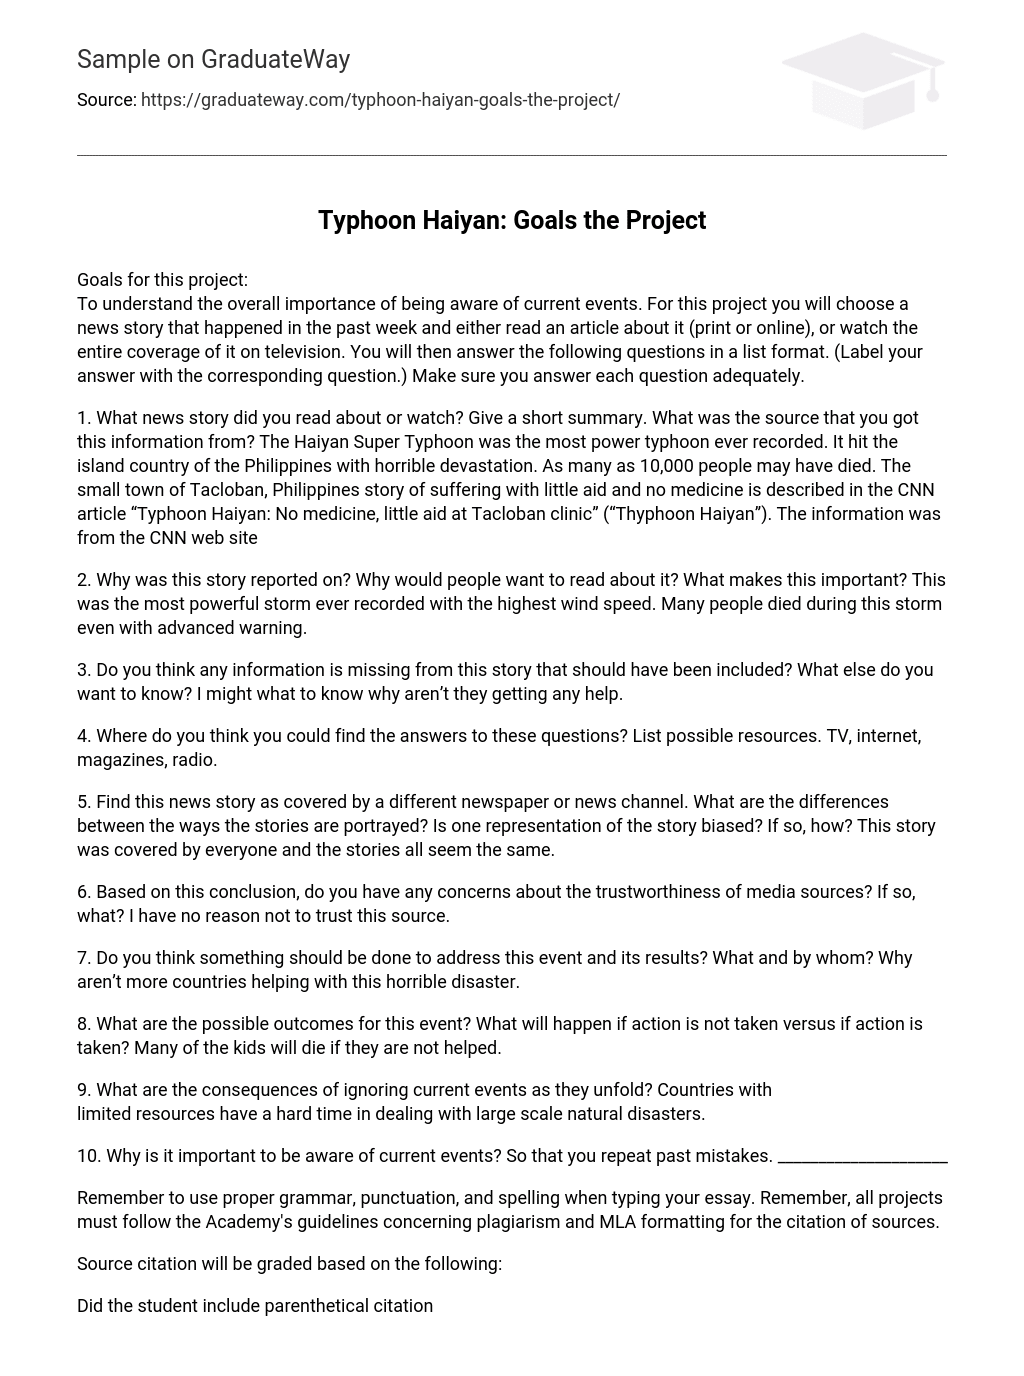 Typhoon Haiyan: Goals the Project